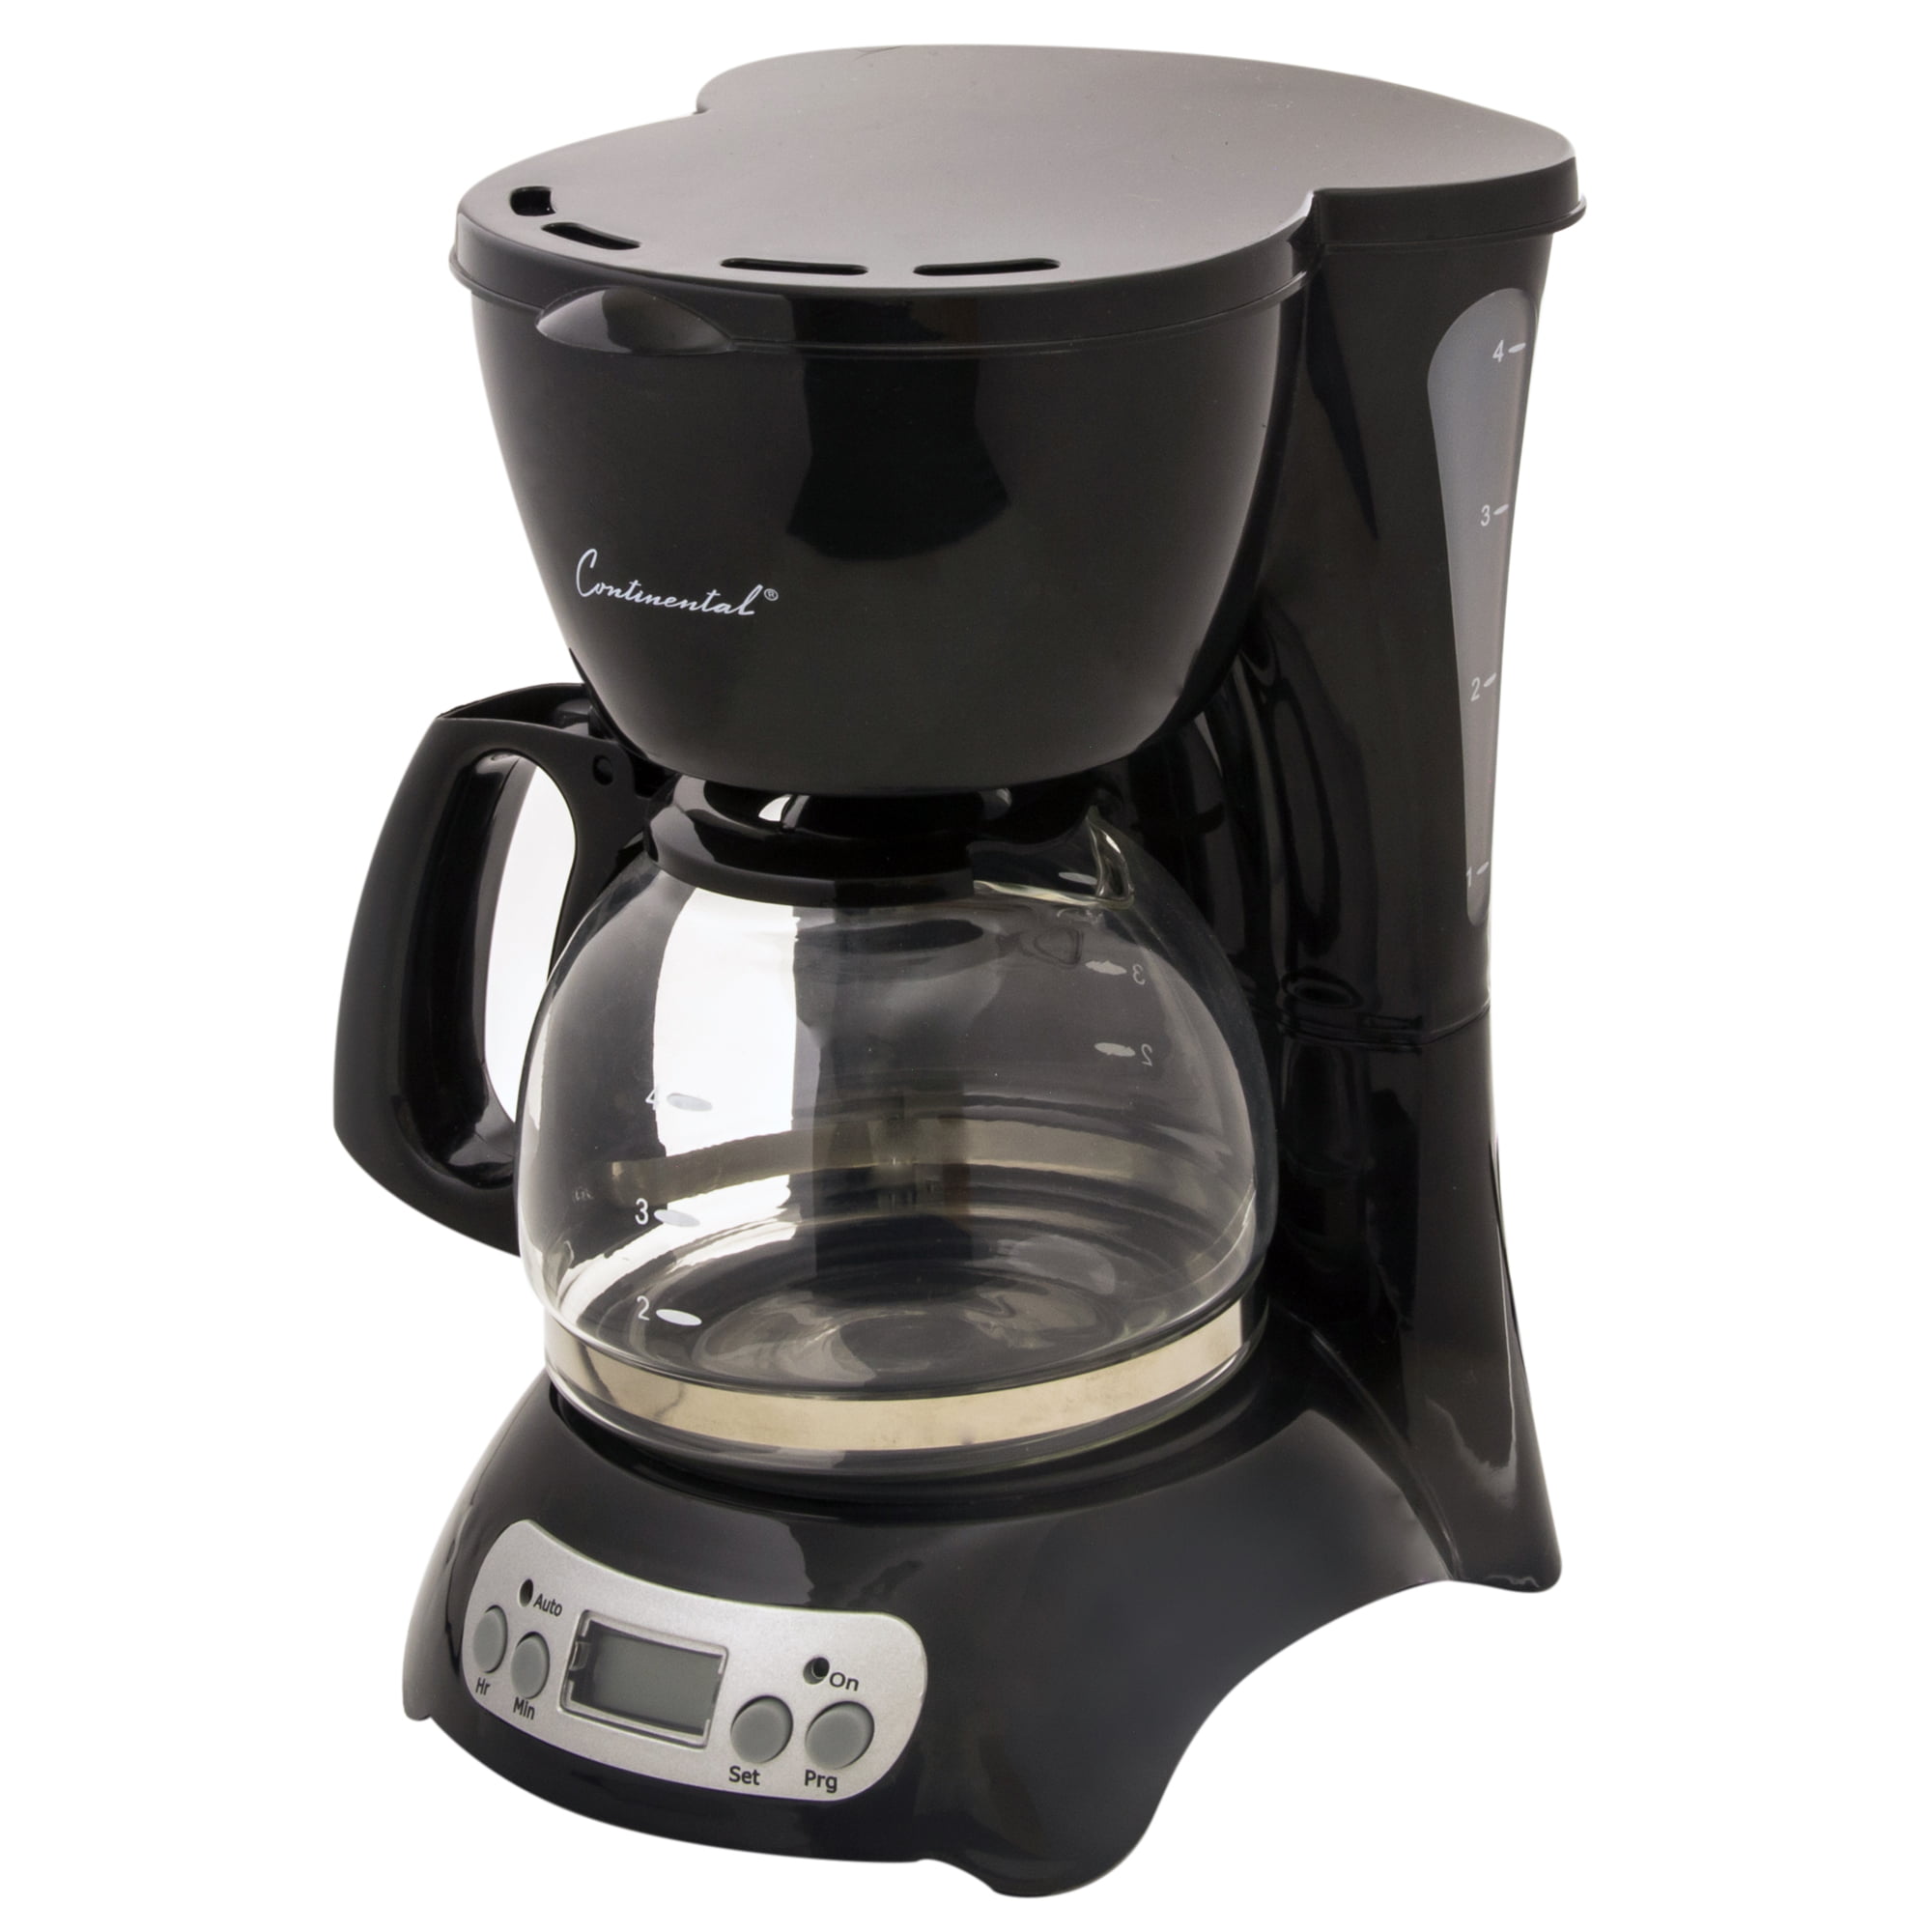 Coffee Maker, 4-Cup, Pause & Serve, White - Continental